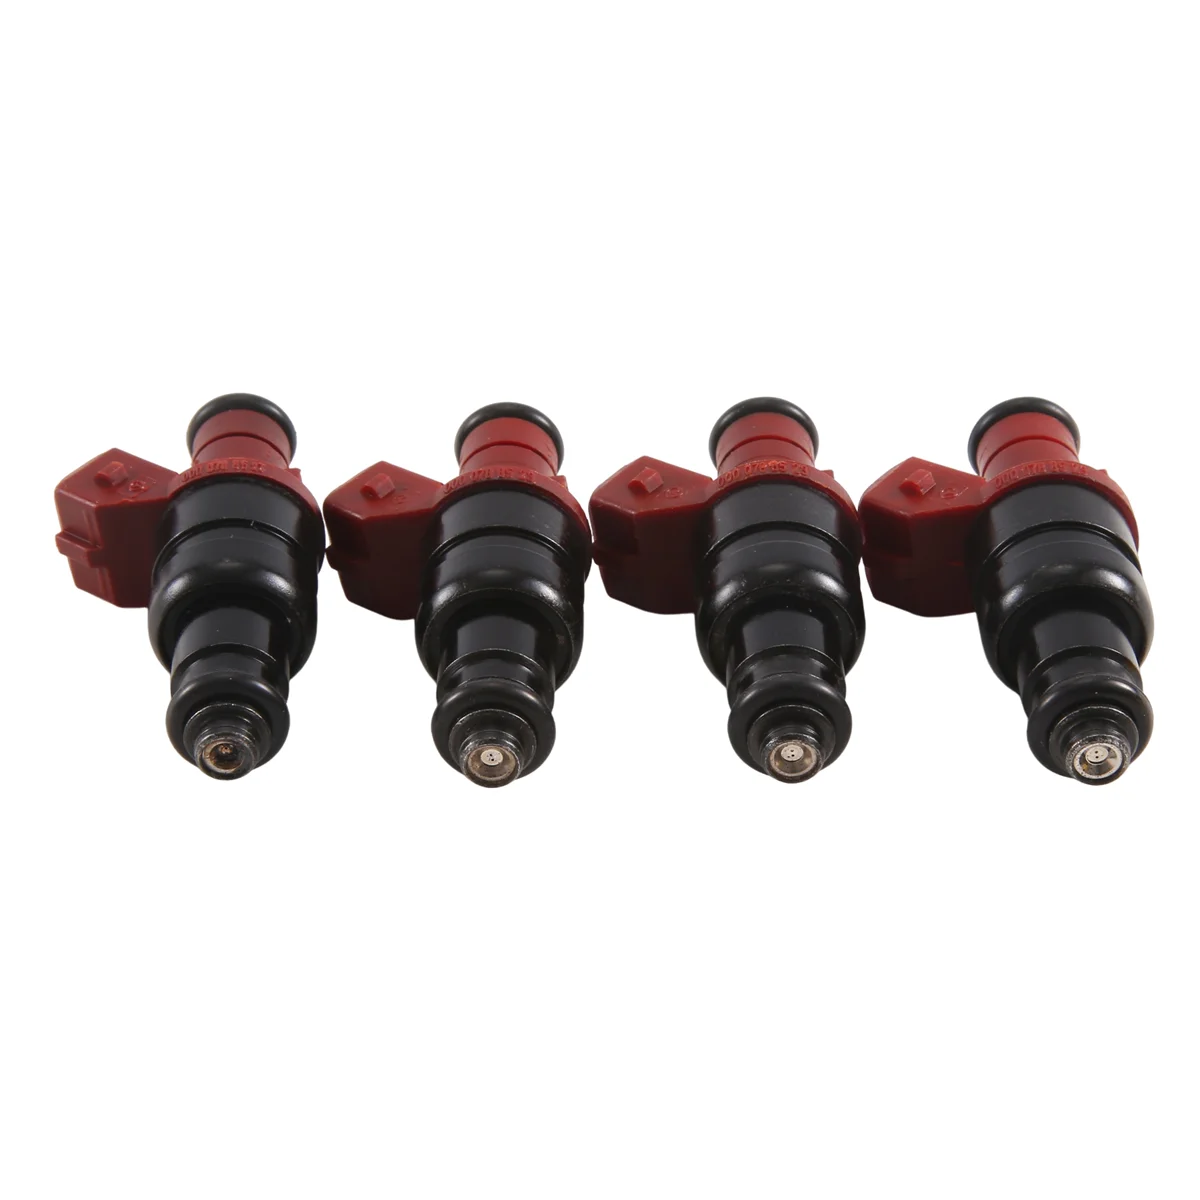 

4PCS 0000788523 New Fuel Injector Nozzle for Mercedes-Benz W210 S210 W202 S202, 1.8-2.0 BJ. 95-05